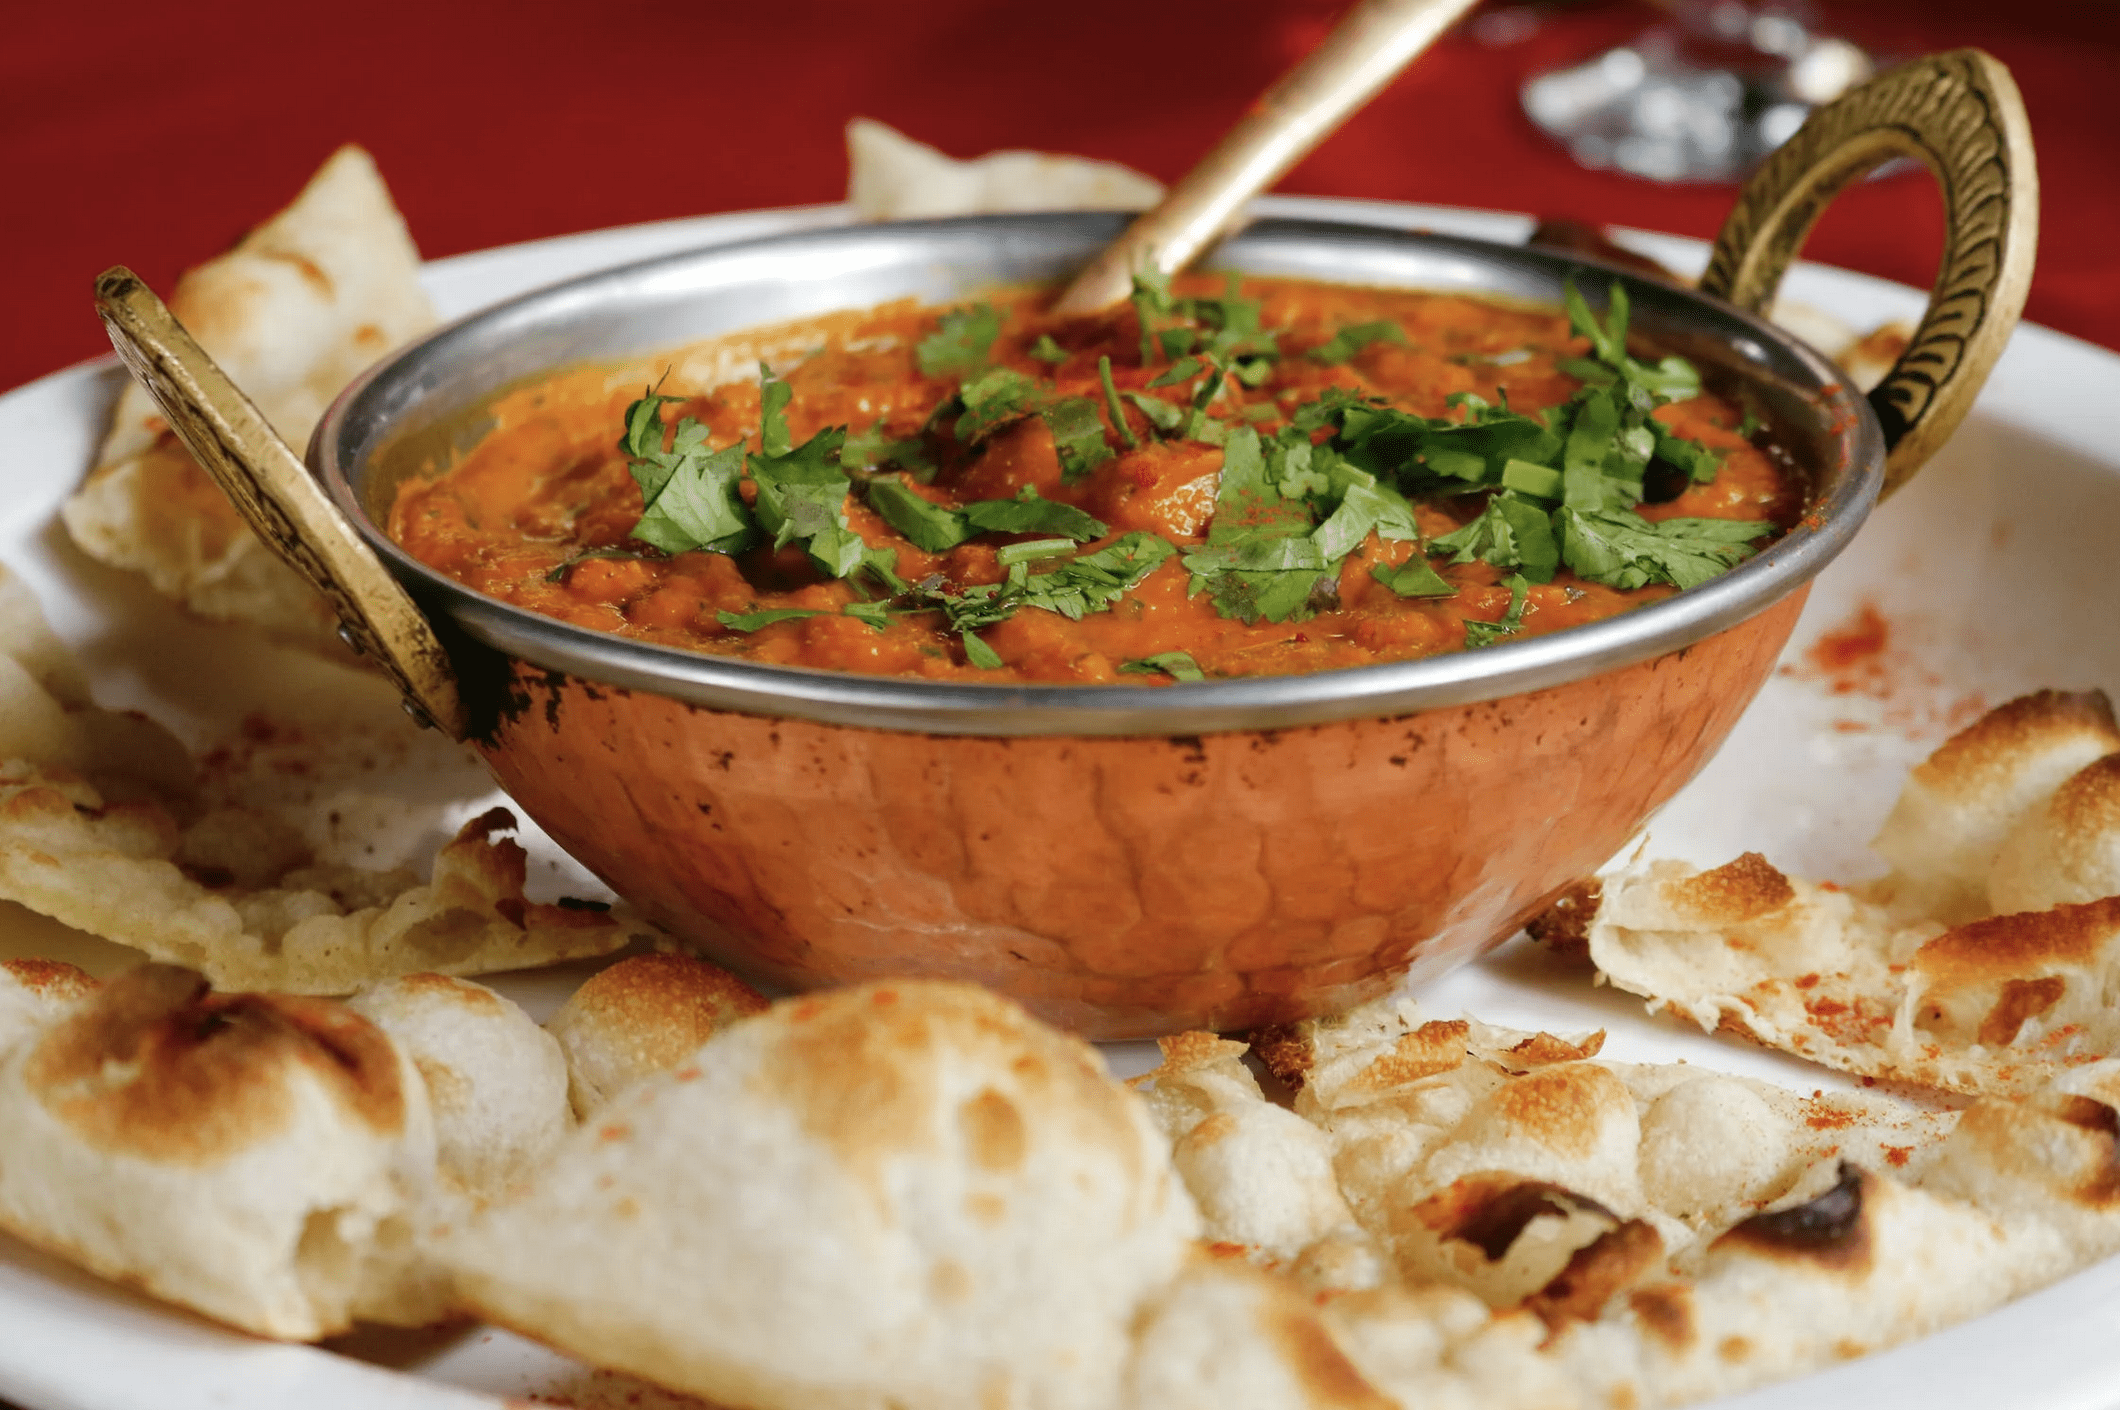 Let's Spice Things Up! The Best Indian Restaurants in North London